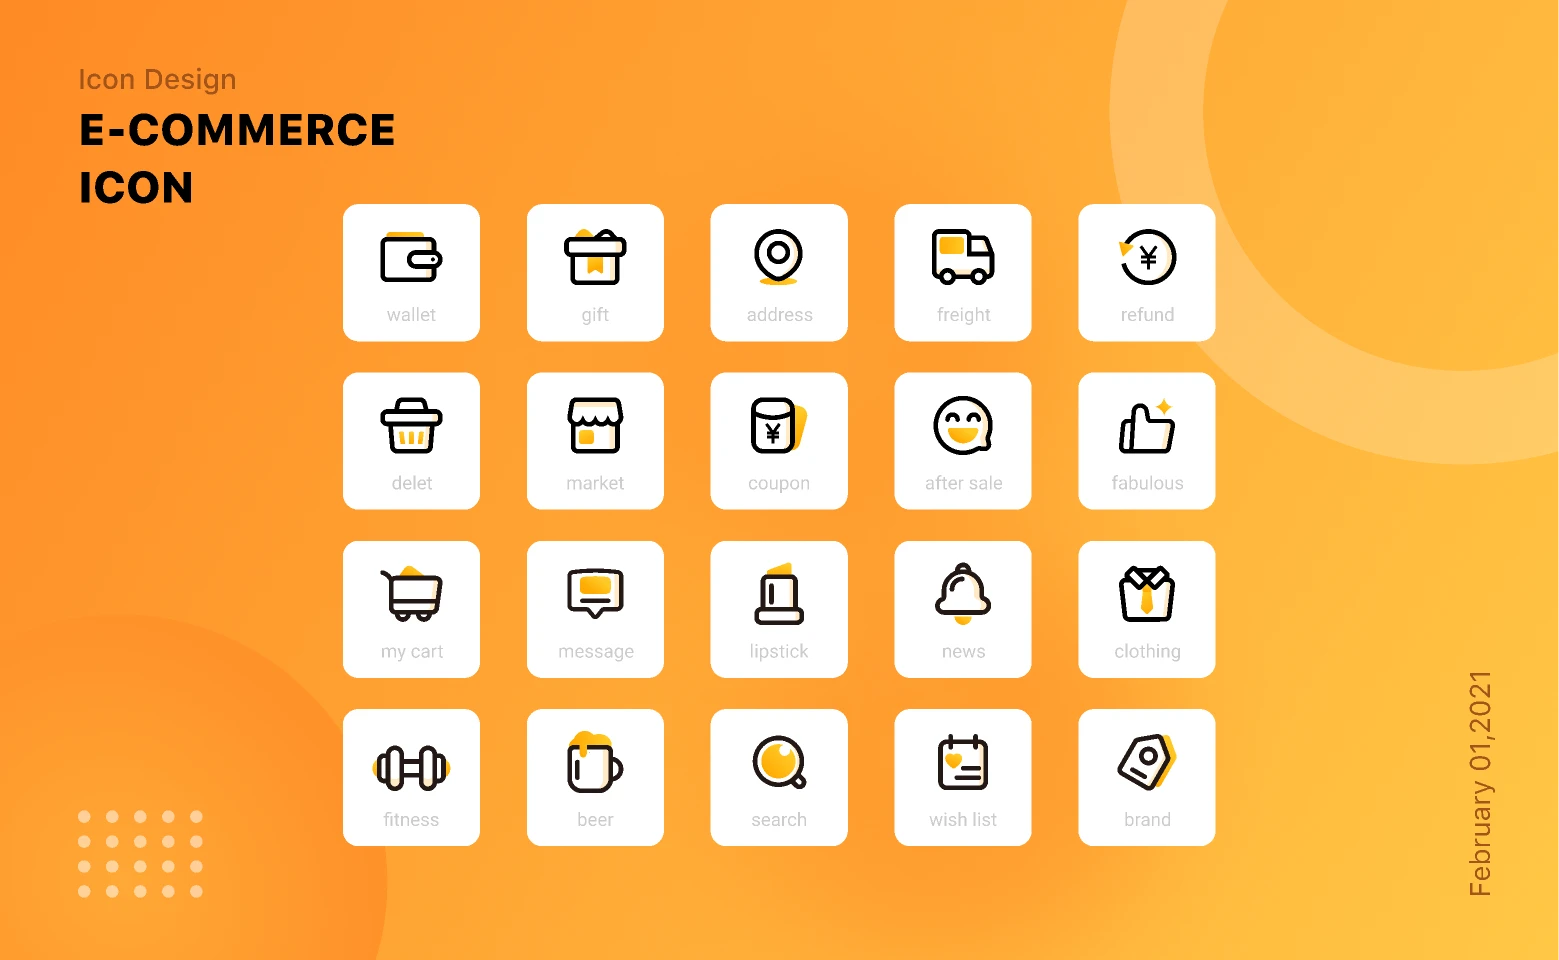 E-COMMERCE ICON for Figma and Adobe XD